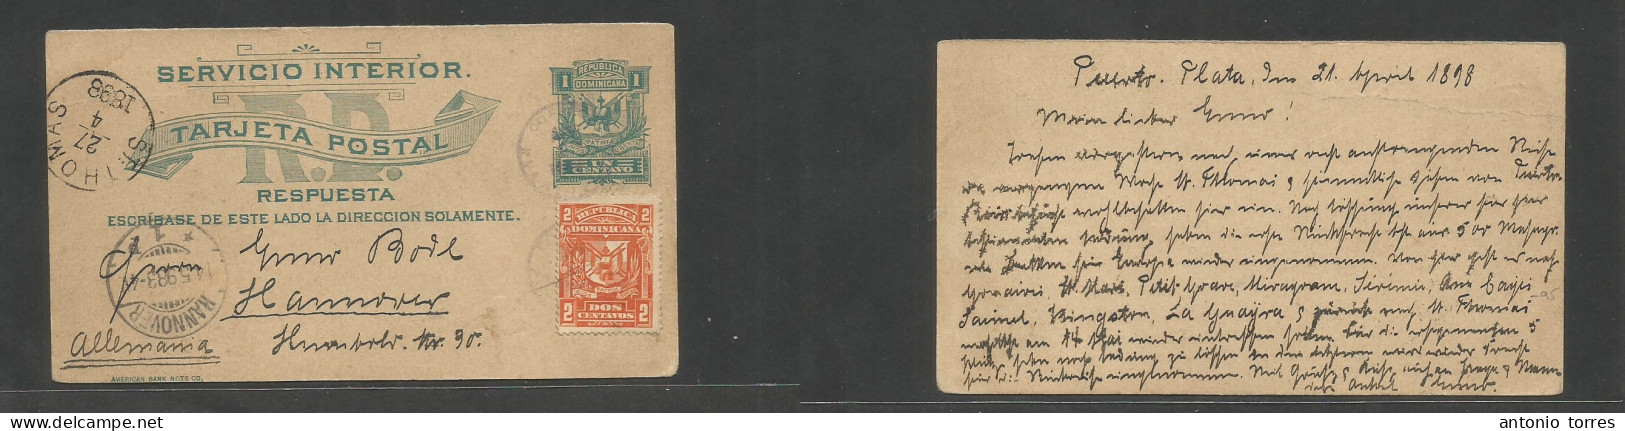 Dominican Rep. 1898 (21 April) Reply Half Usage, Puerto Plata - Germany, Hannover (4 May) Via St. Thomas, DWI (27 April) - Dominican Republic